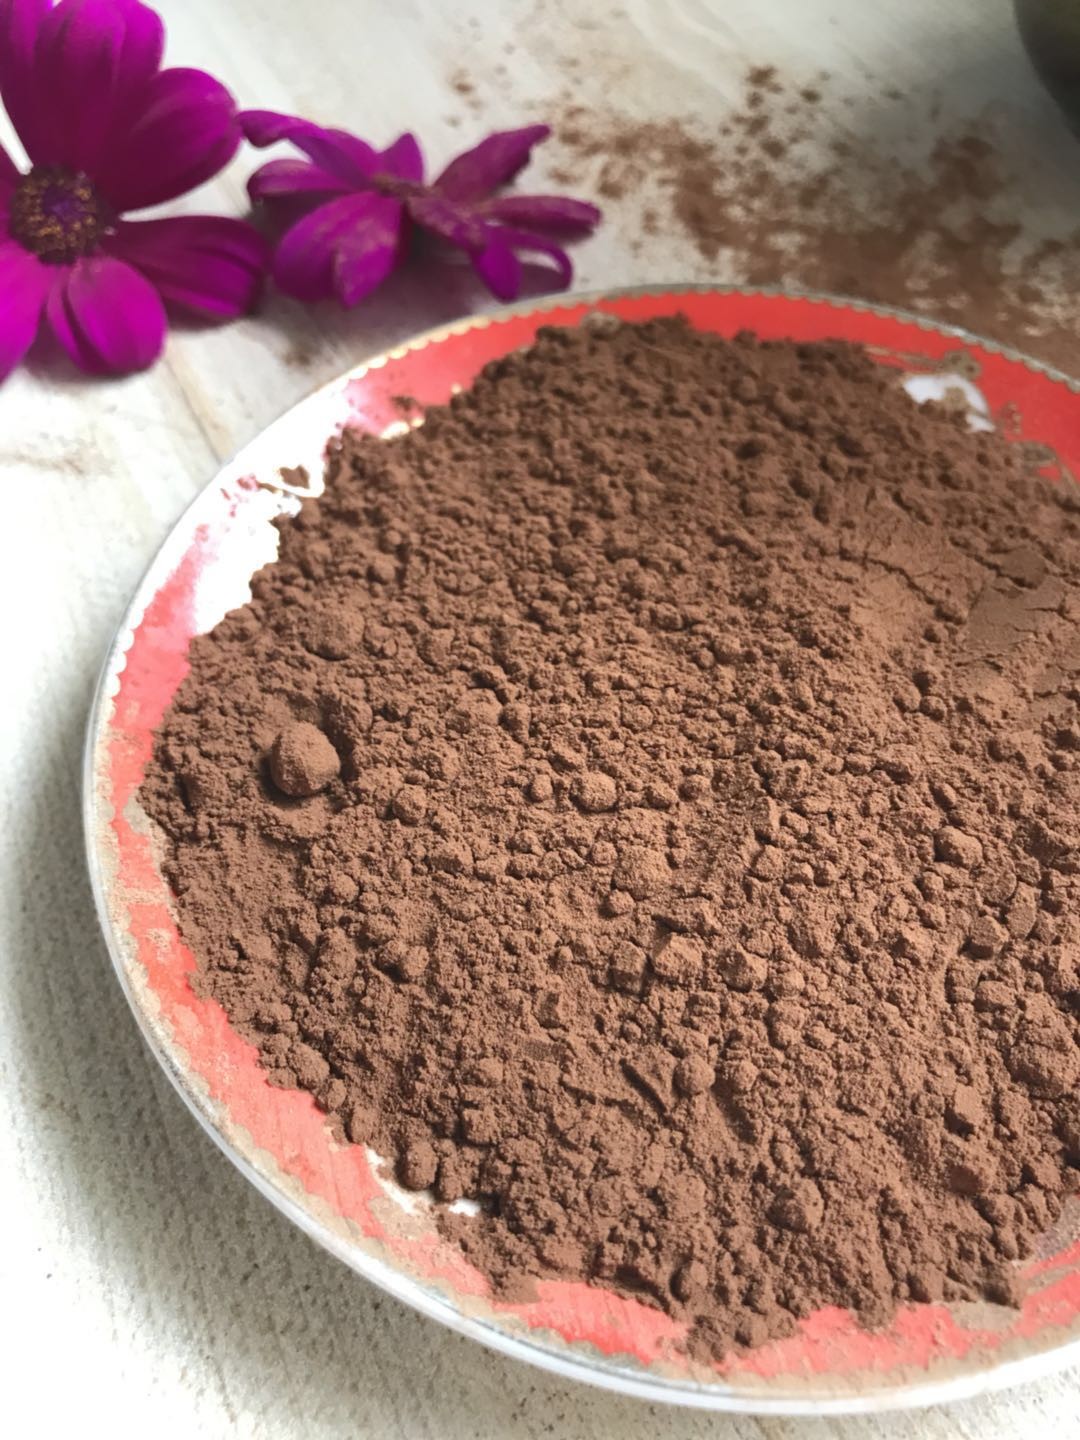 Free Sample Dutch Processed Cocoa Powder Chocolate Raw Material With Stimulant Properties